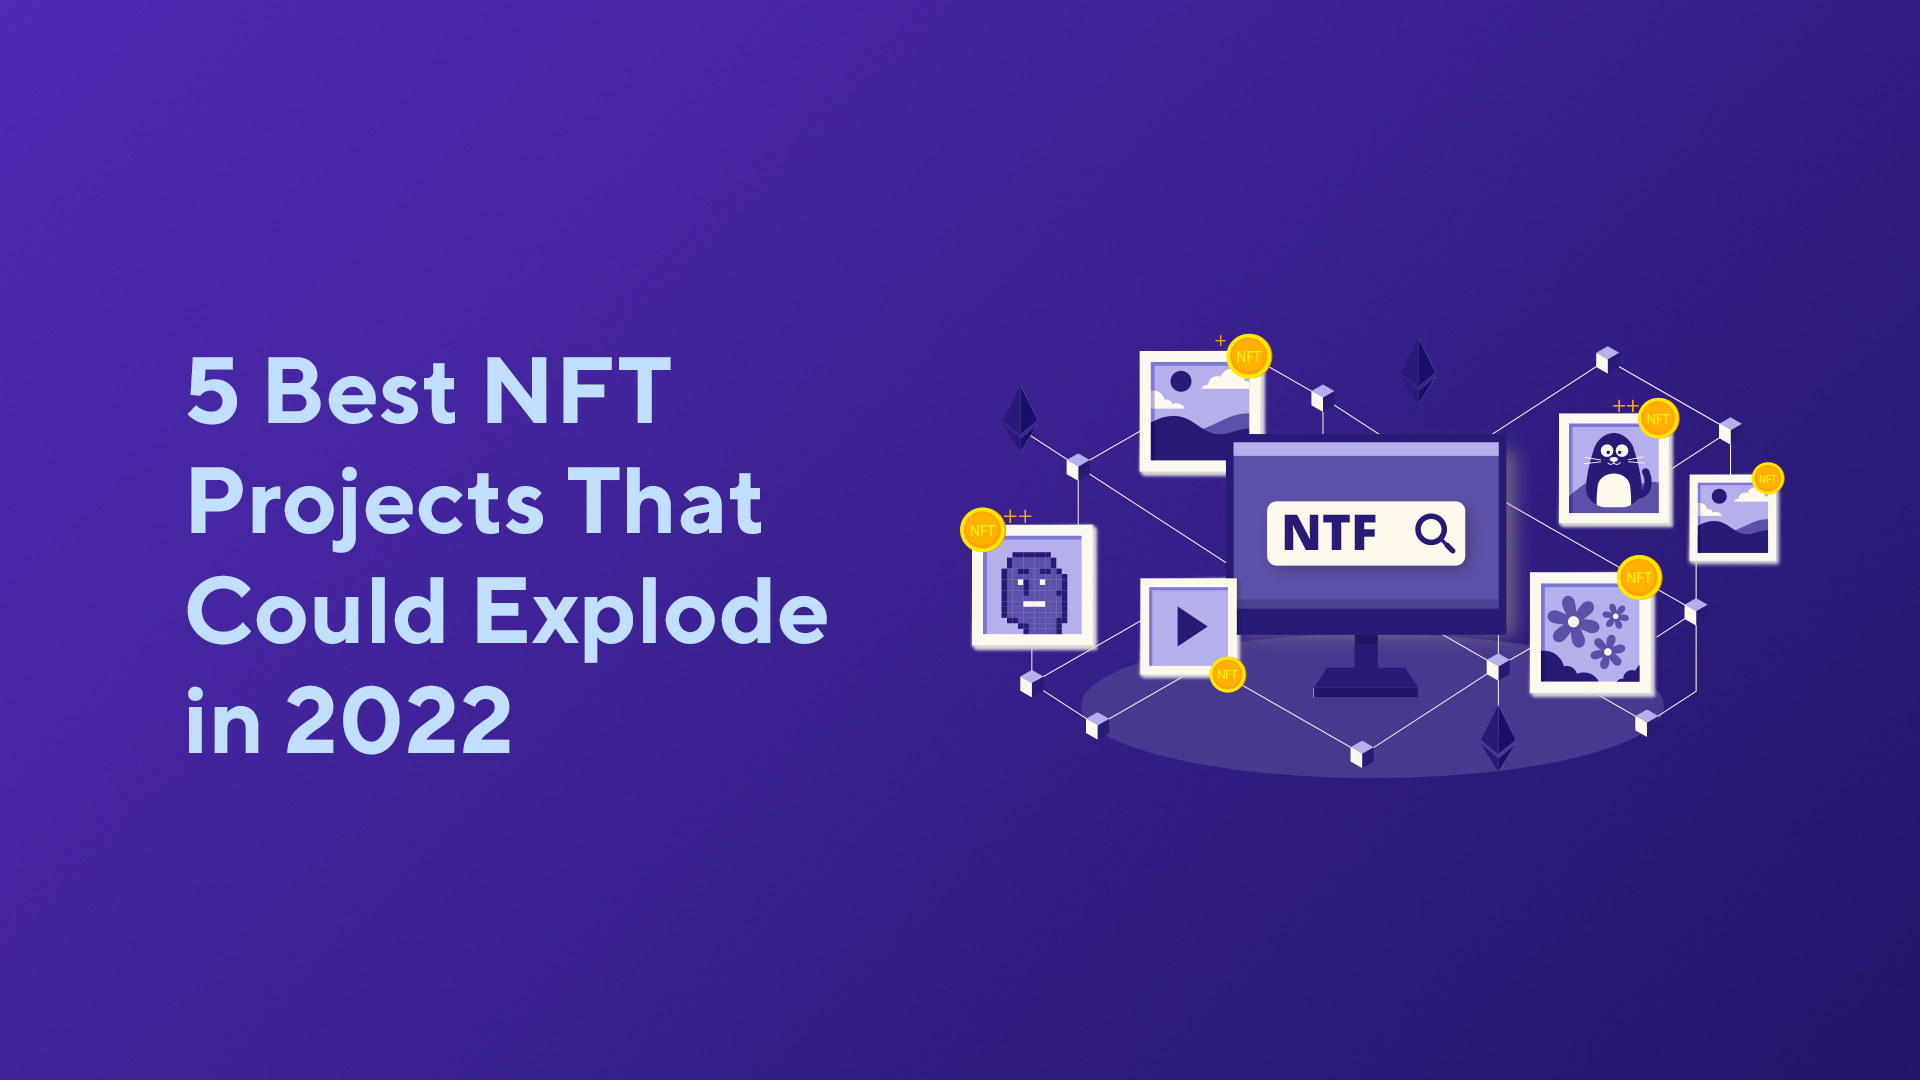 5 Best NFT Projects That Could Explode in 2022